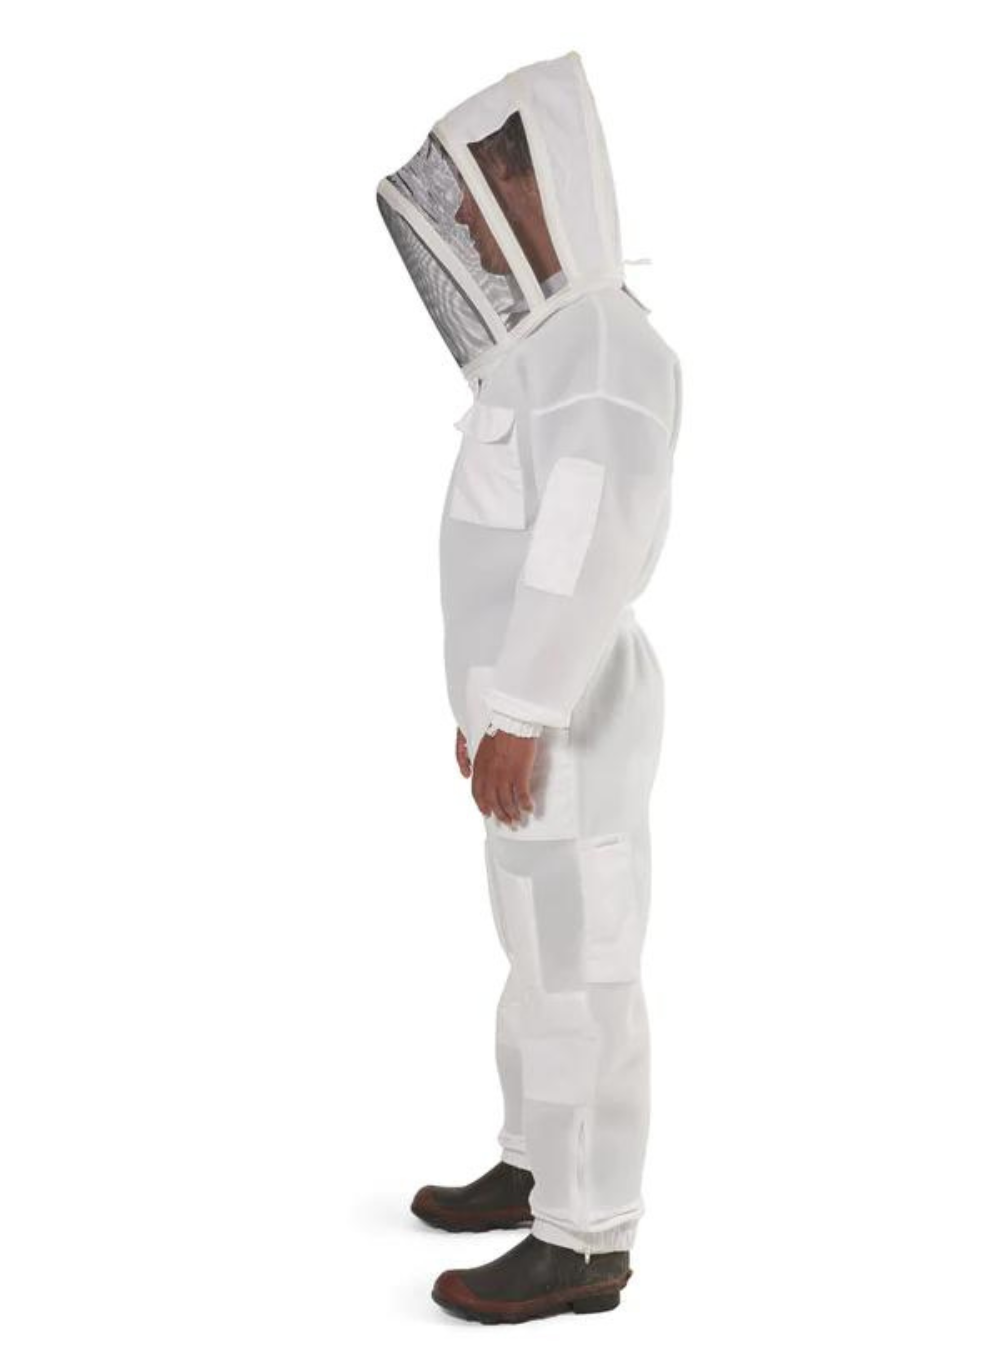 A side profile of 3 Layer Ventilated Bee Suit With a breathable ventilated Fencing Veil and elastic cuffs to make beekeeping comfortable.